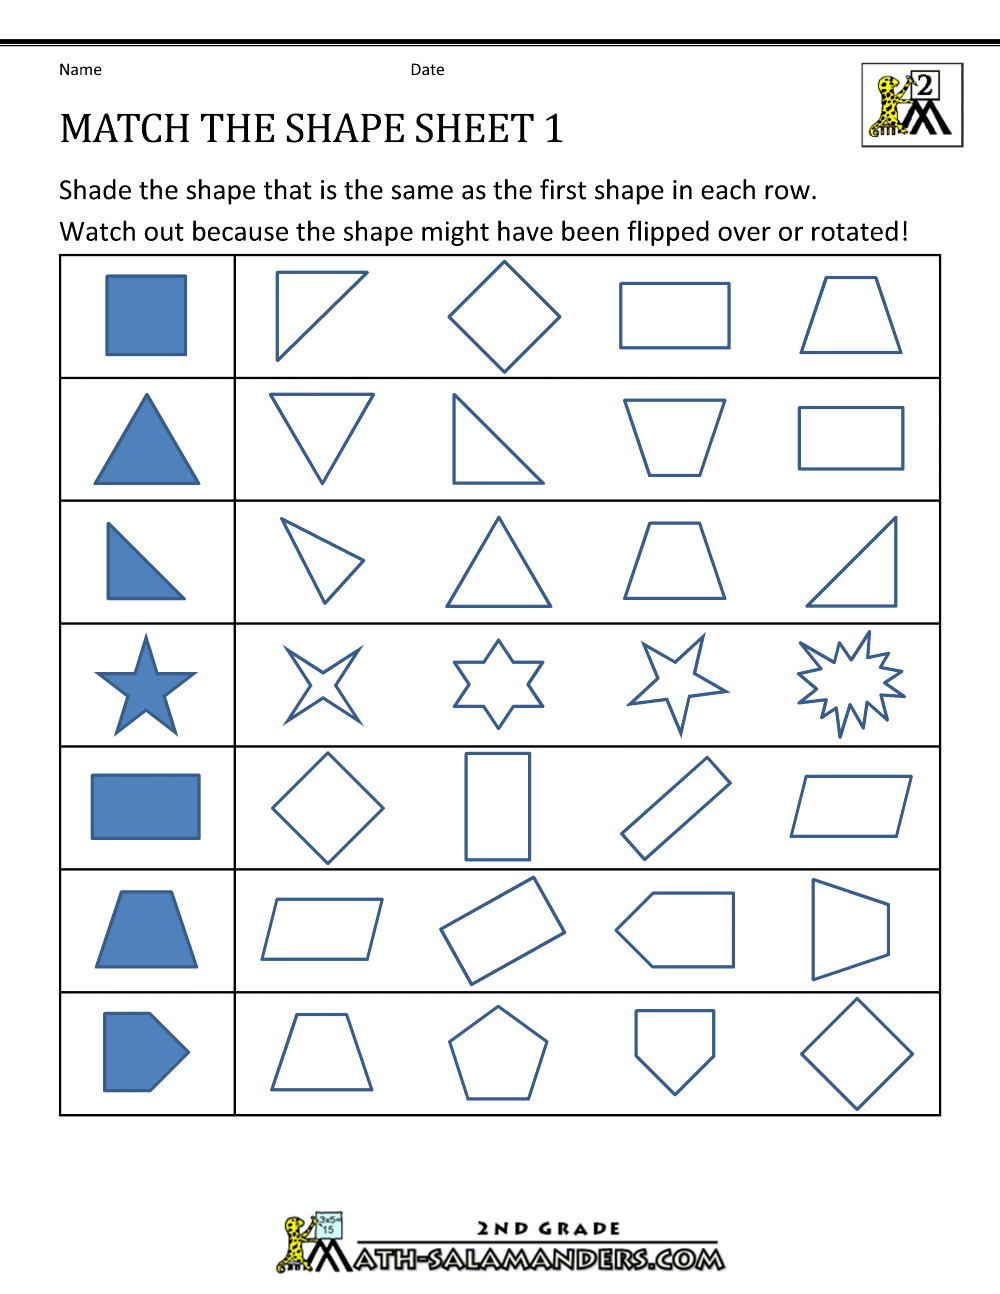 Transformation Geometry Worksheets 2nd Grade alphabet worksheets, education, free worksheets, learning, math worksheets, and worksheets Triangle Congruence Worksheet With Answers 1294 x 1000